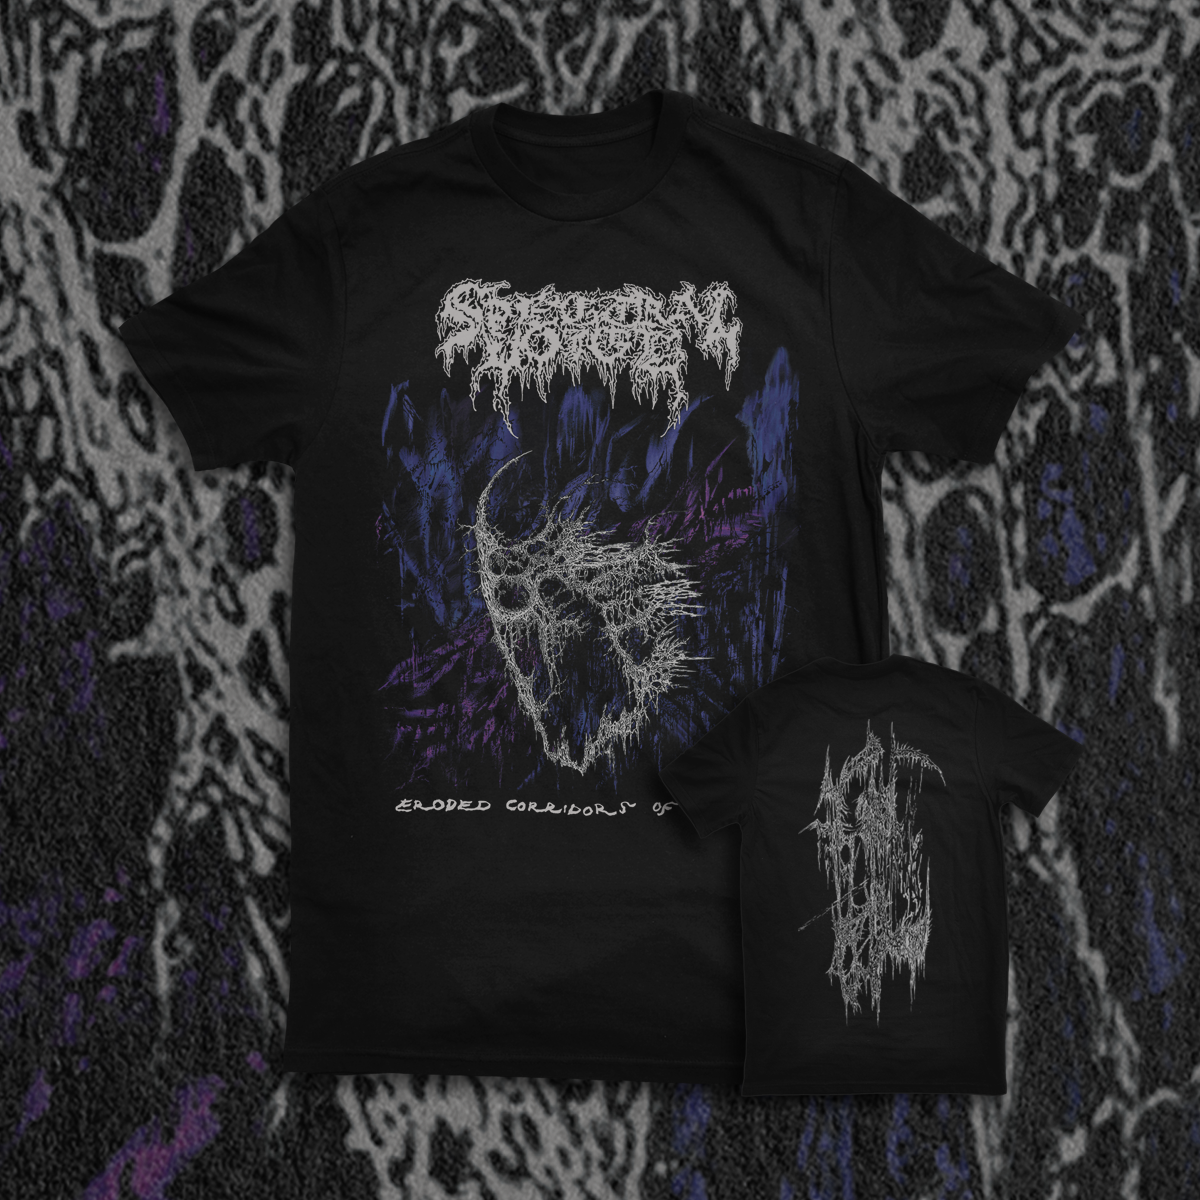 SPECTRAL VOICE "ERODED CORRIDORS" SHIRT (PRE-ORDER)